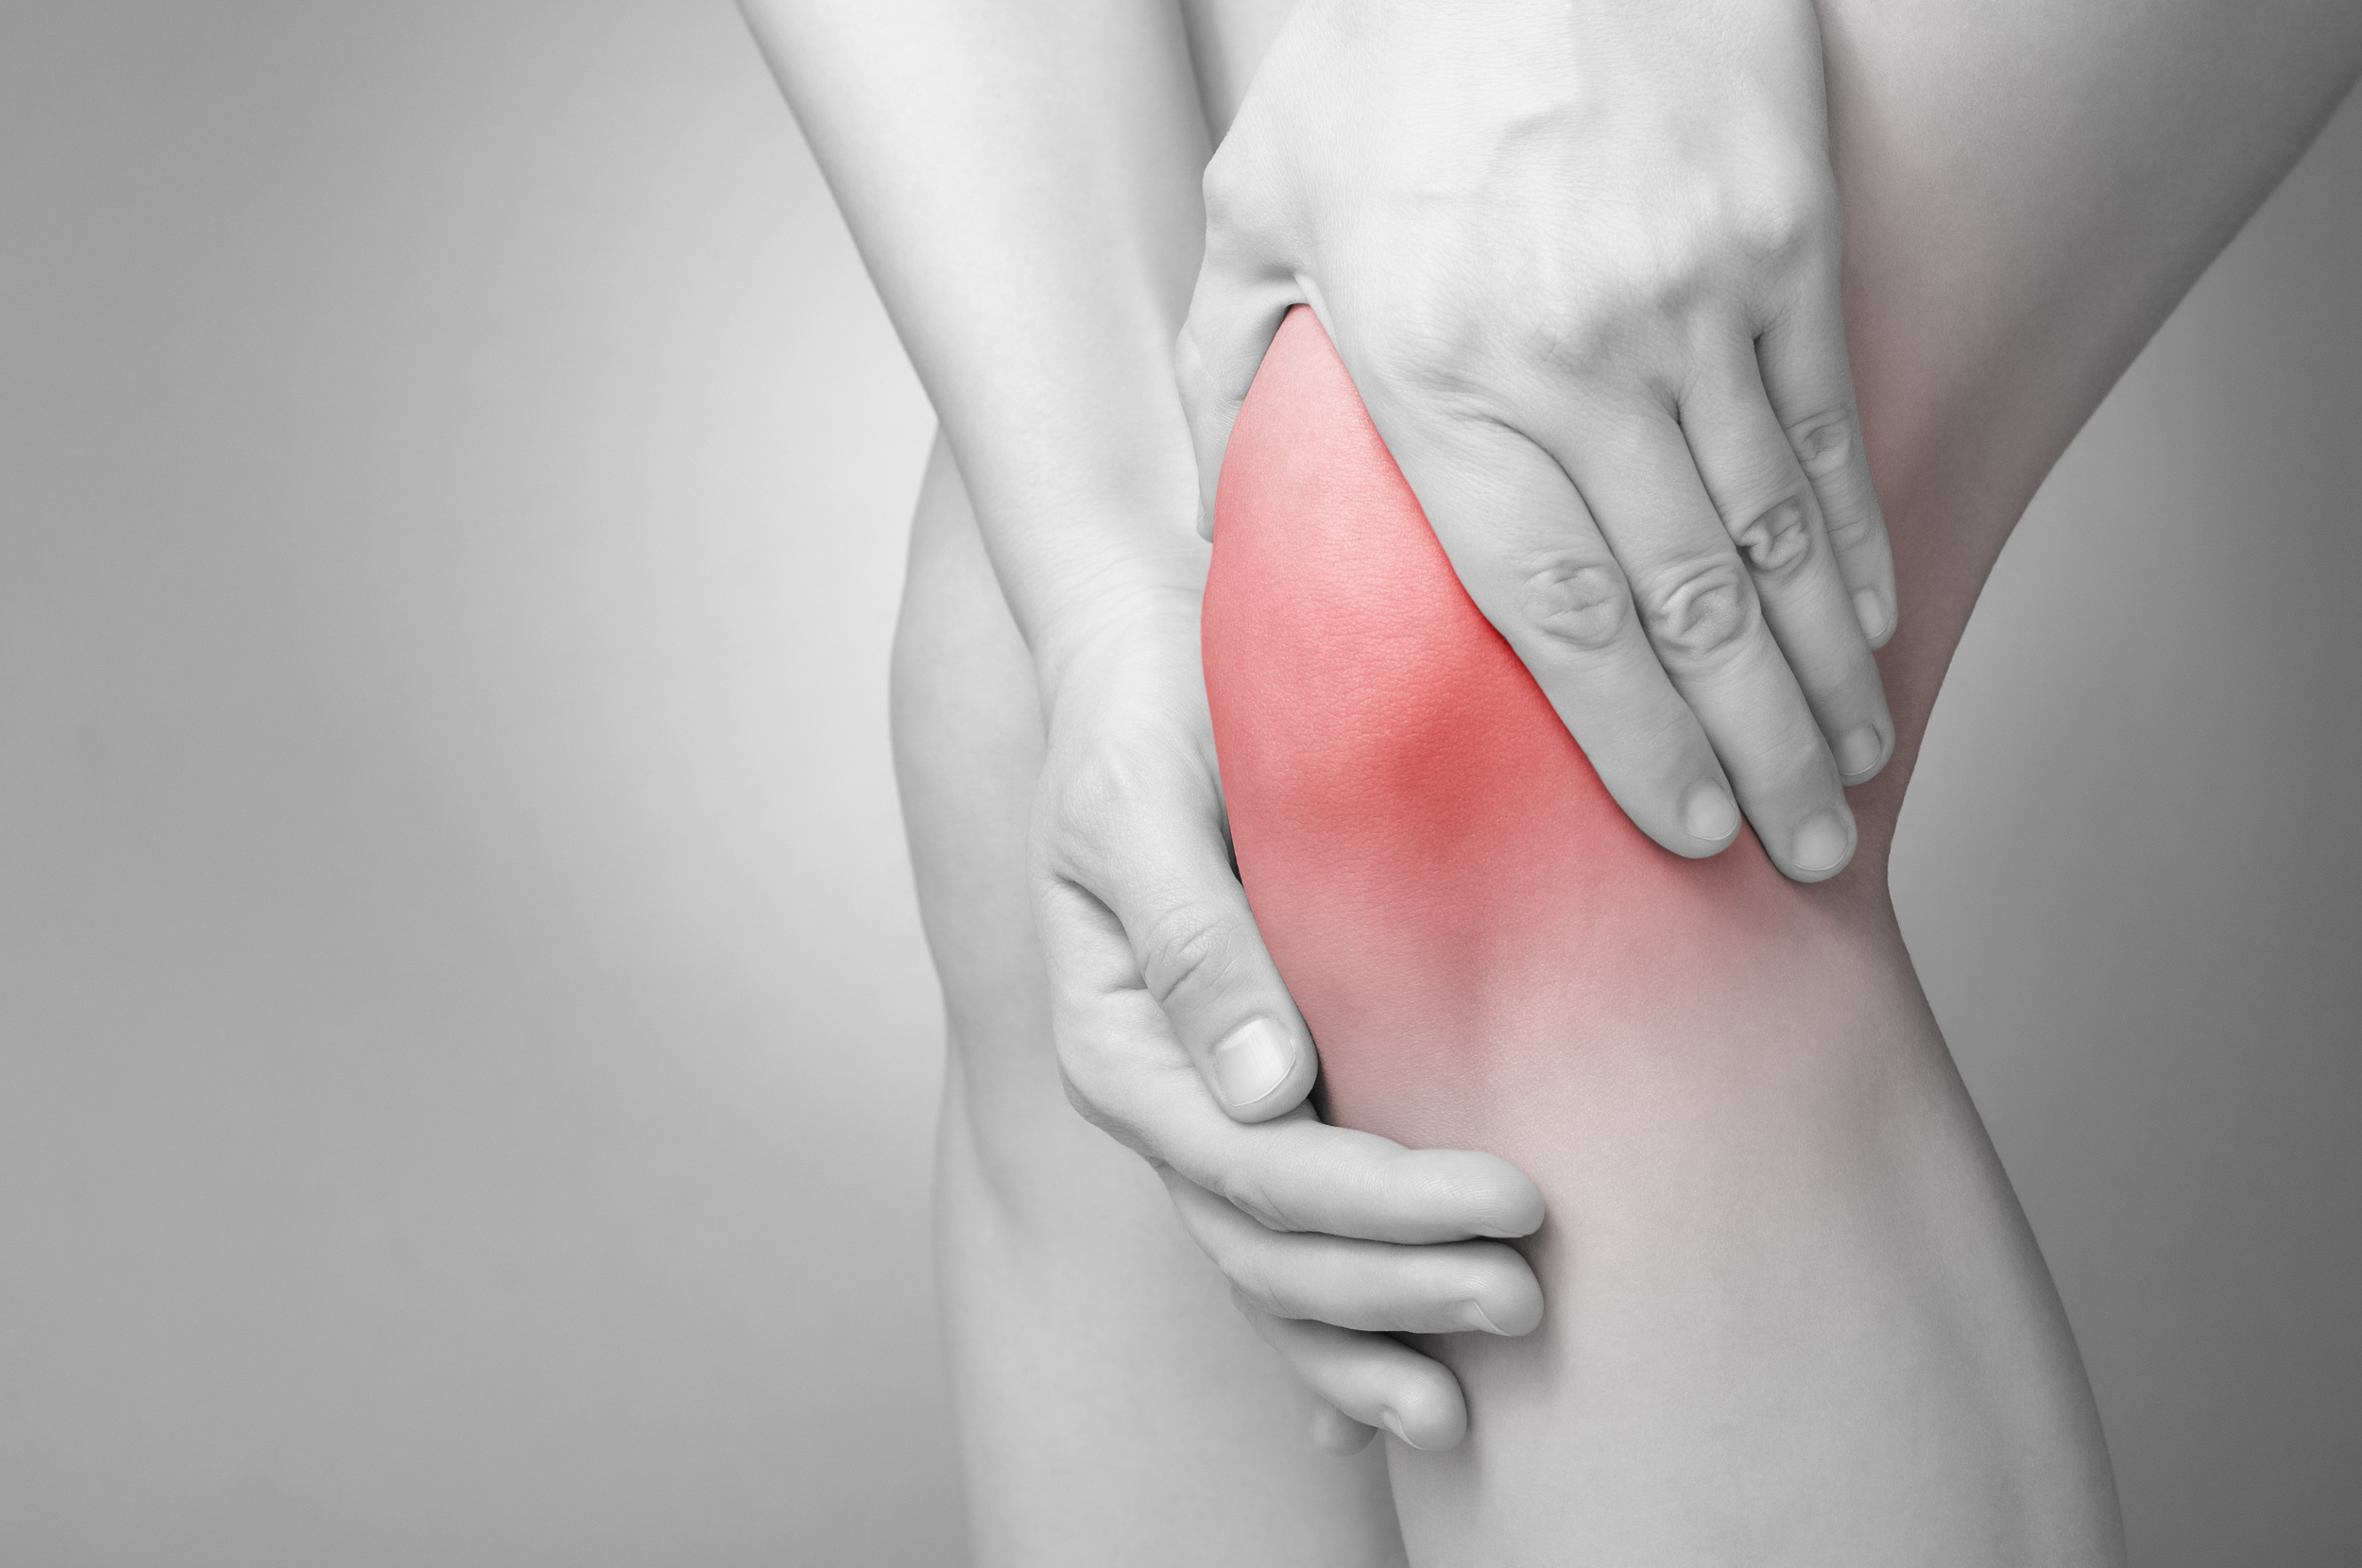 What are knee pain / issues?